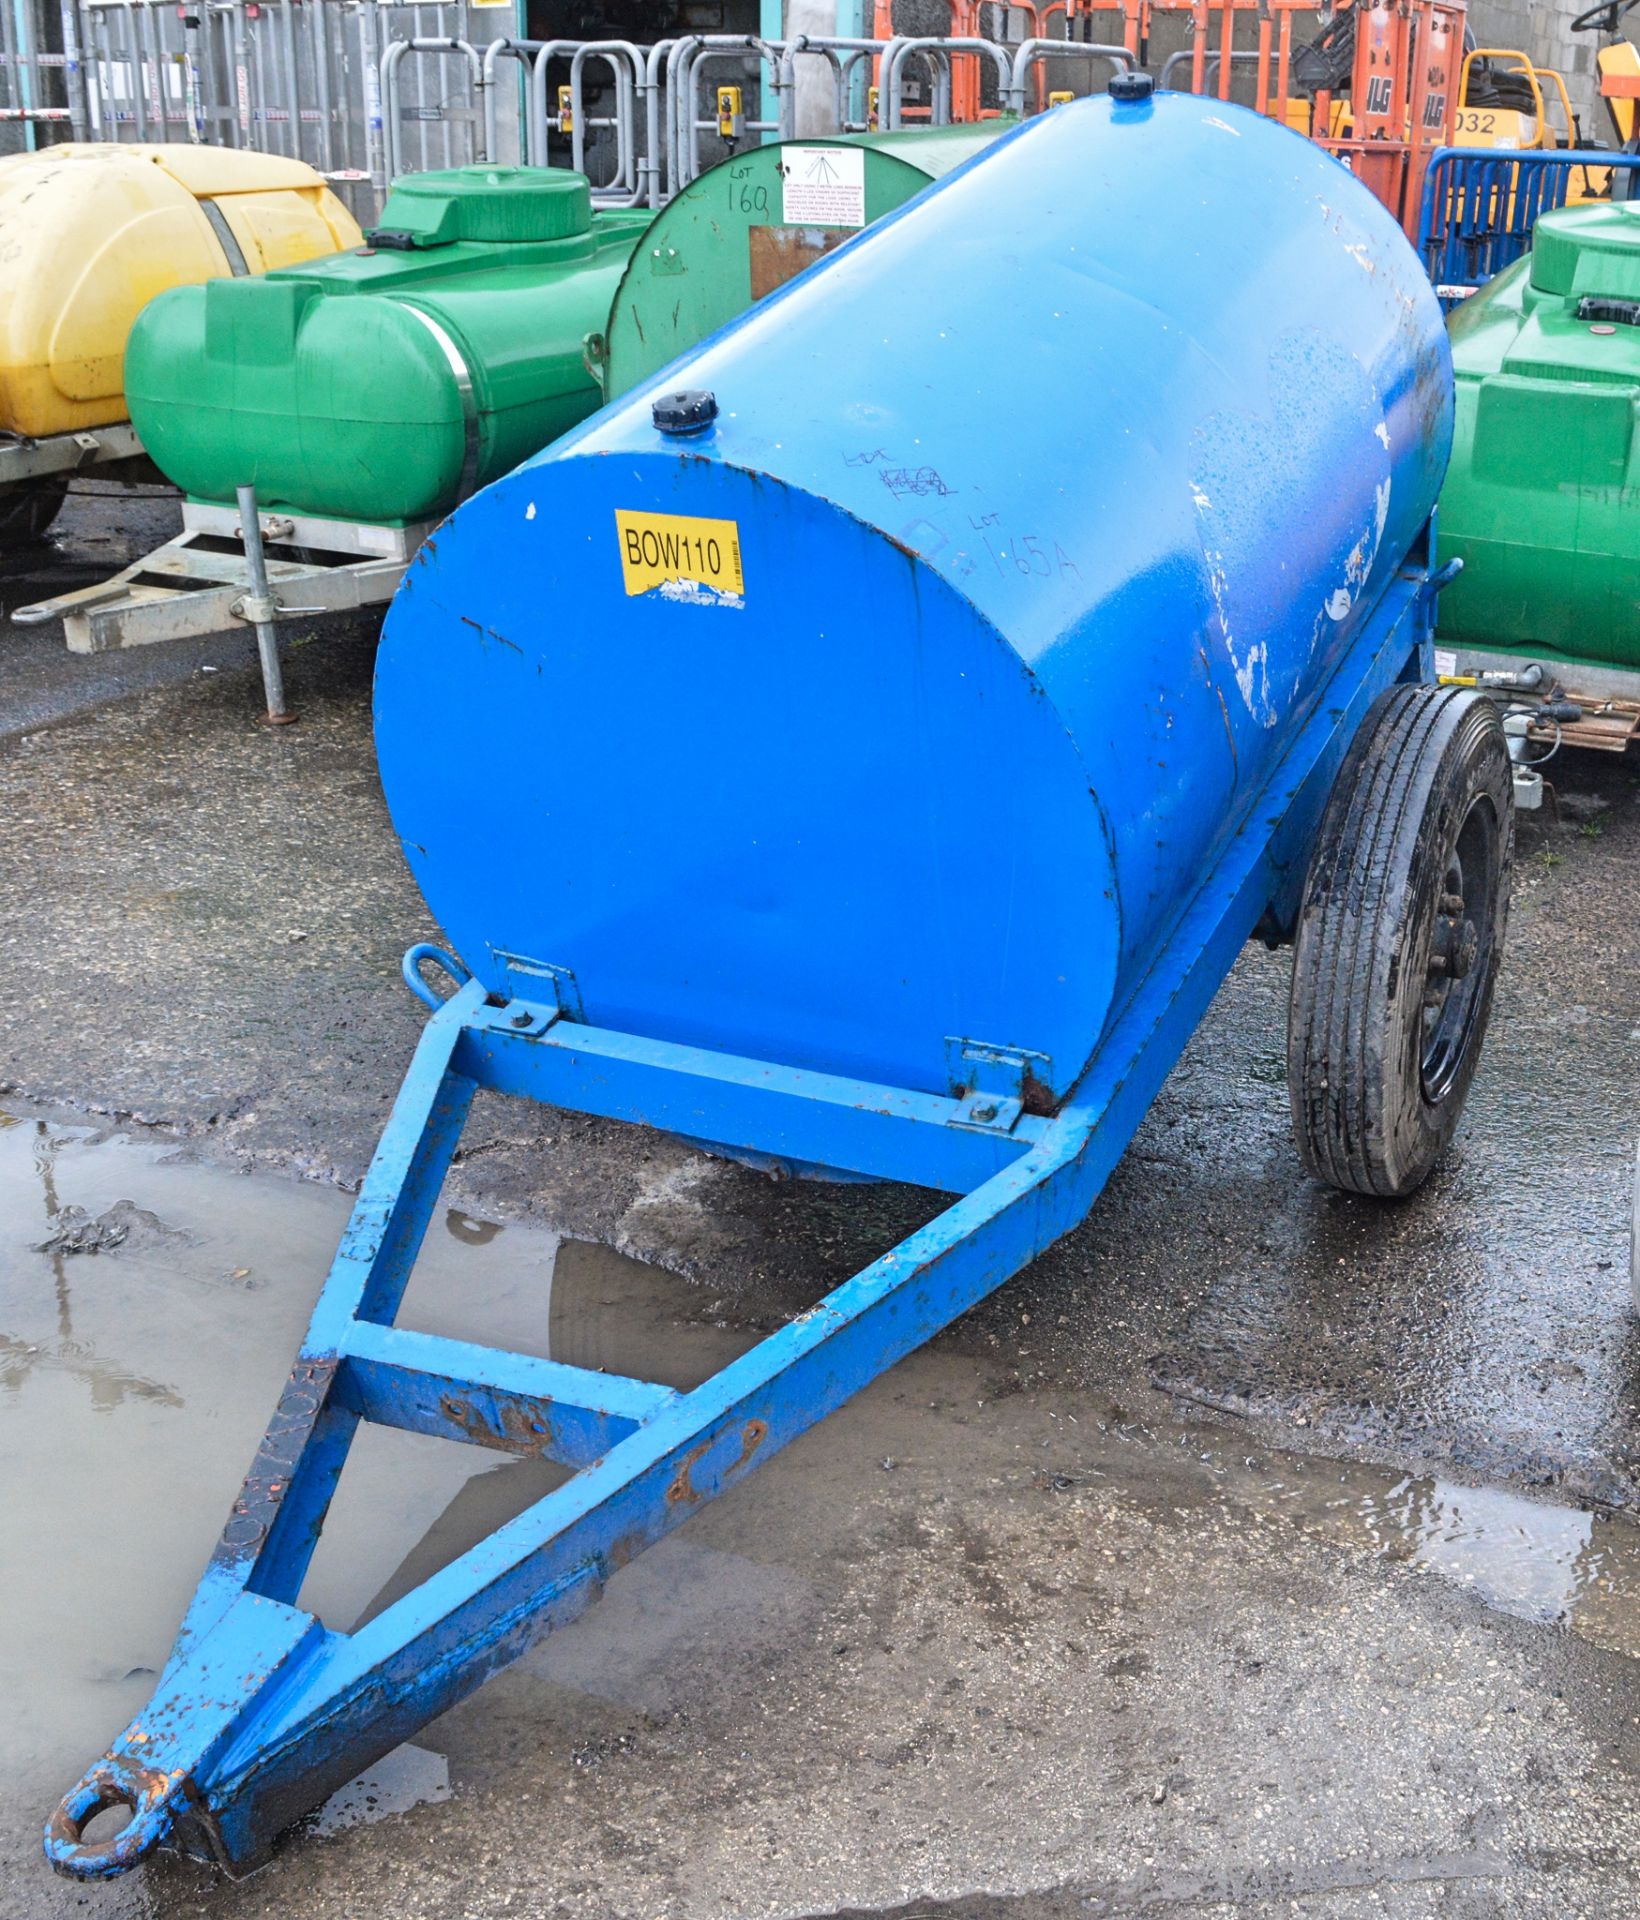 250 gallon site tow water bowser BOW110